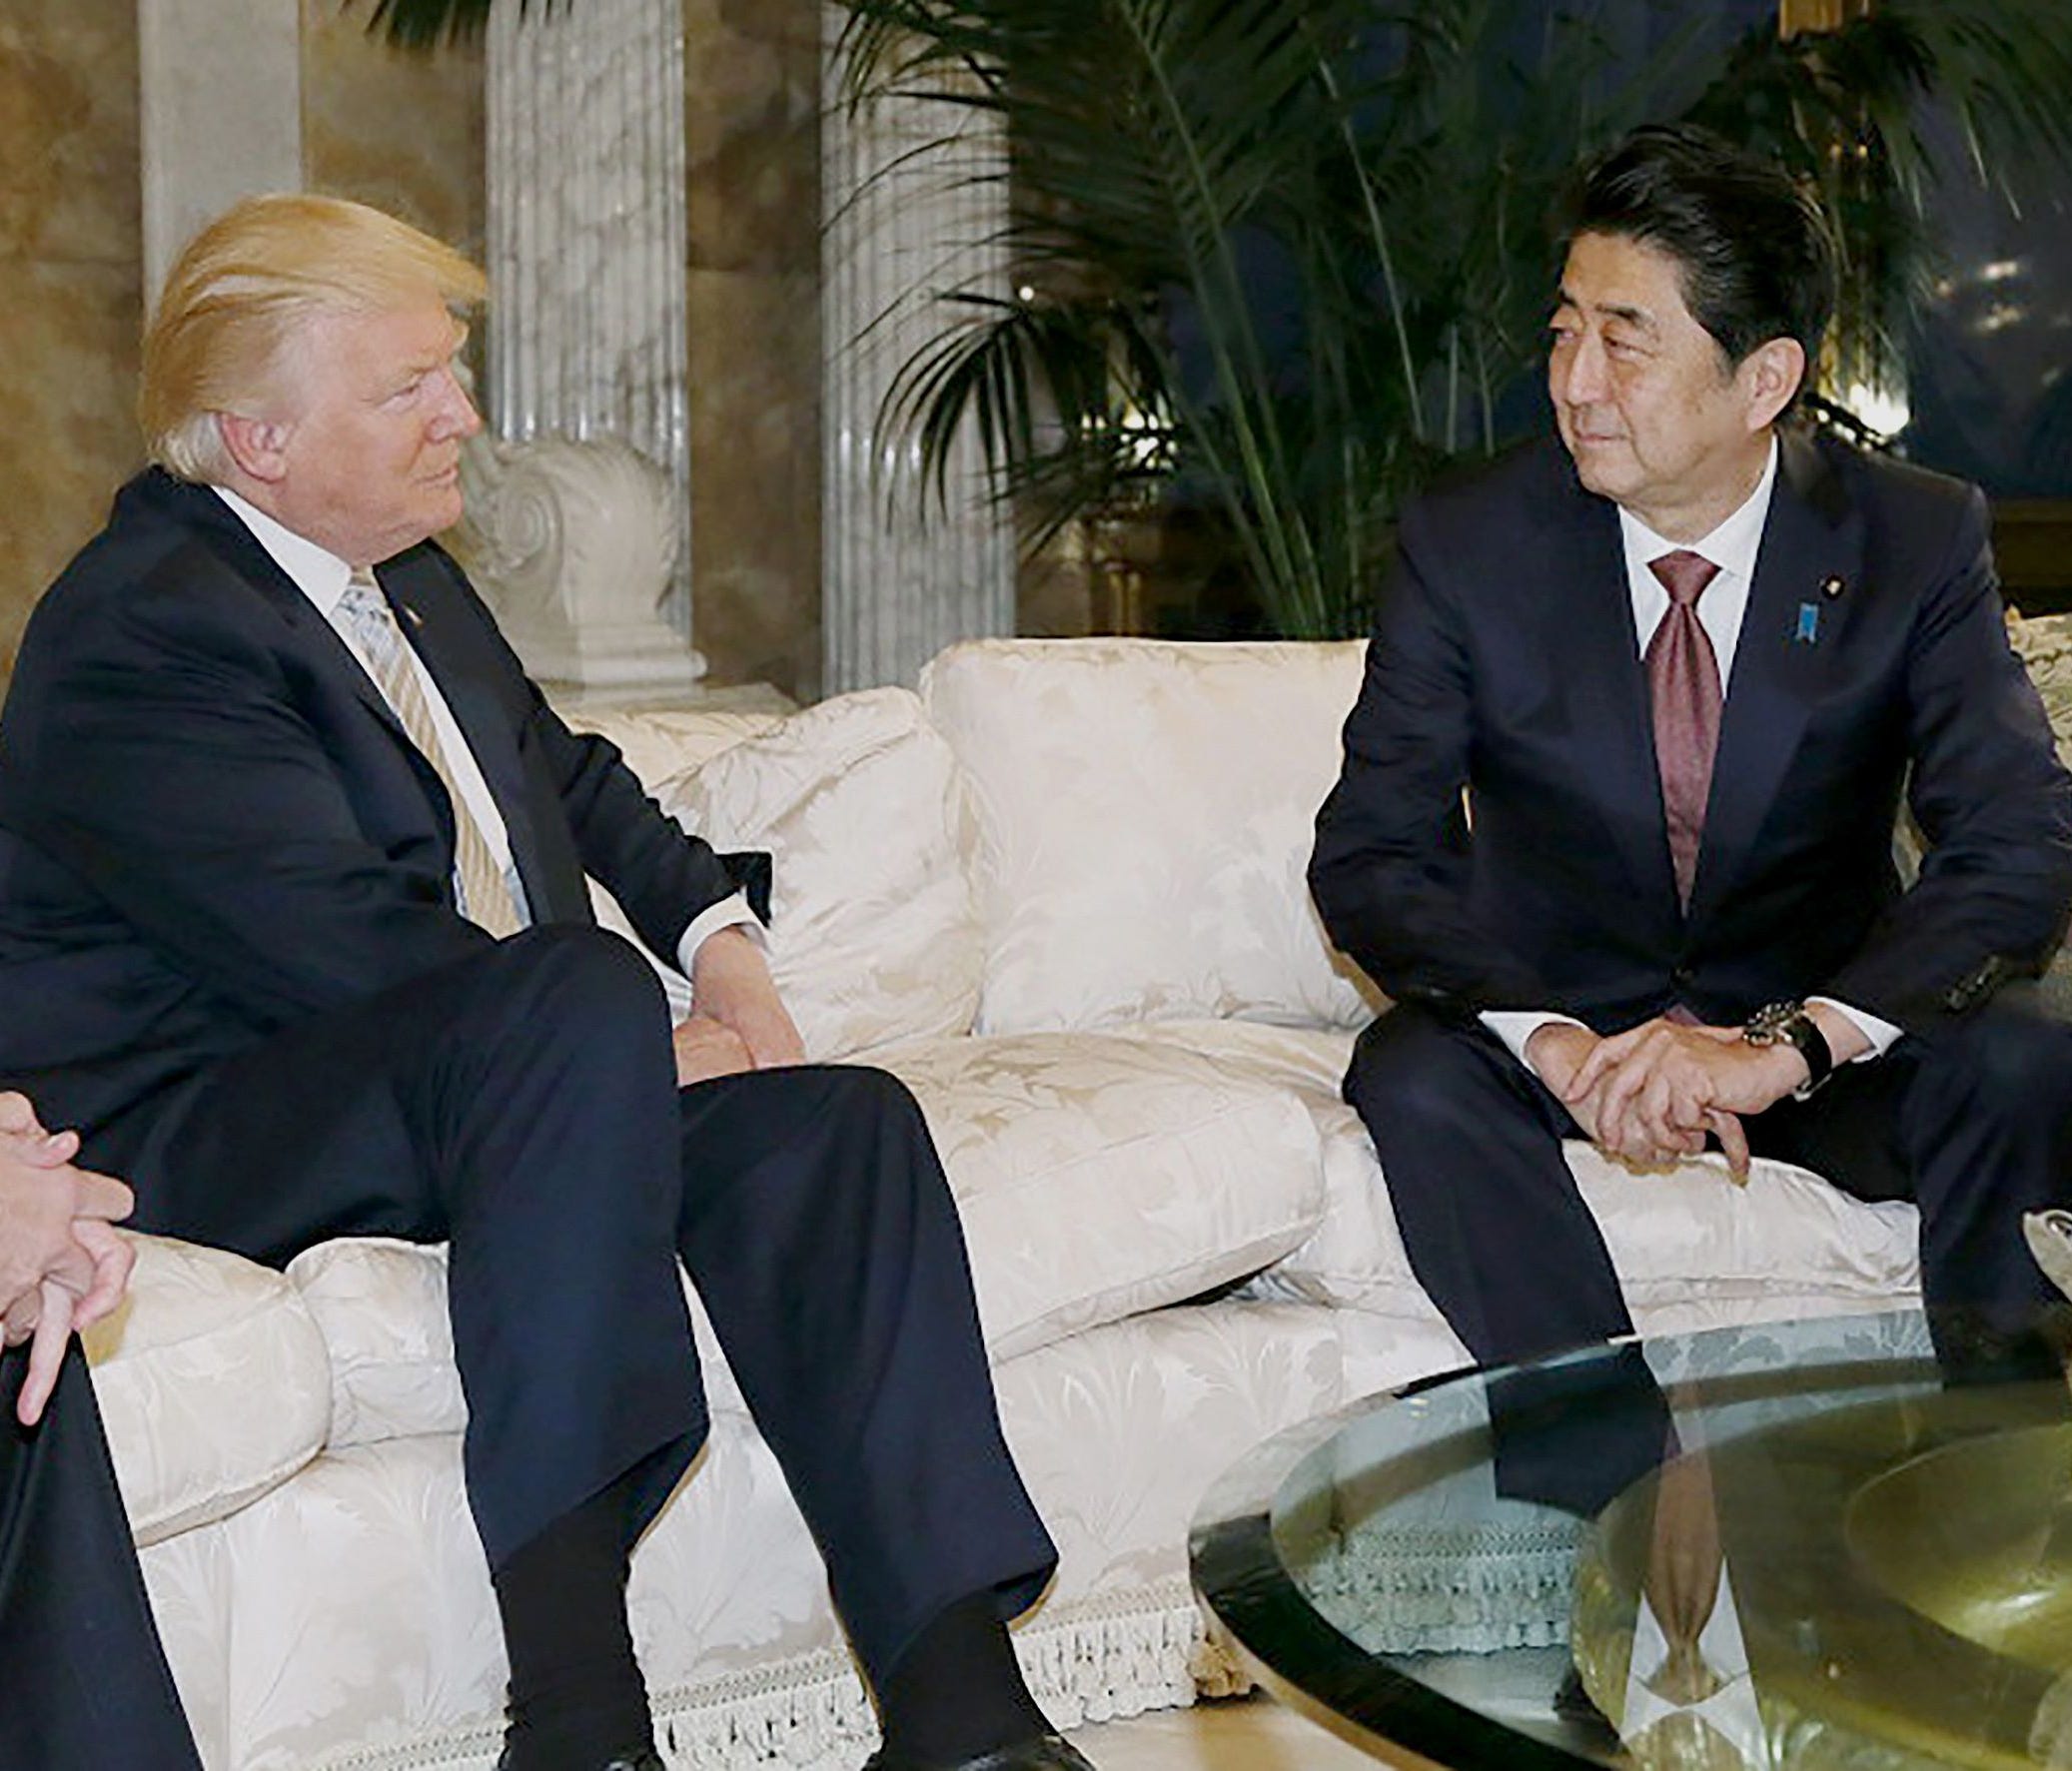 This handout picture, released by Japan's Cabinet Secretariat on Nov. 18, 2016, shows Japanese Prime Minister Shinzo Abe in a meeting with then-president-elect Donald Trump in New York.